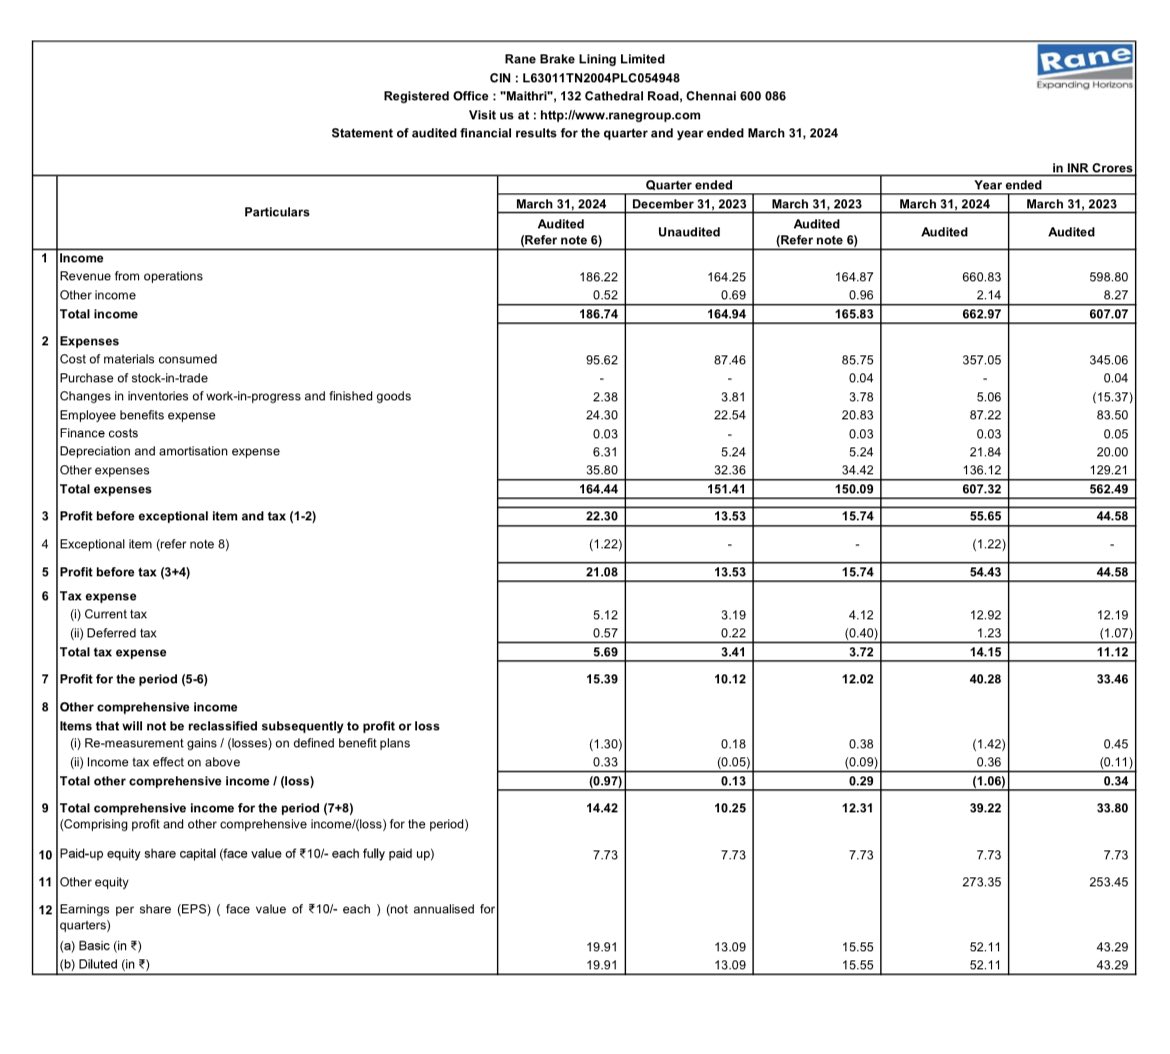 EXTREMELY STRONG Q4FY24 RESULTS HAS BEEN REPORTED BY RANE BRAKE LINING 🔥🔥🔥

Q4FY24 Net Profit Of 15 CR 
VS 
Q3FY24 Net Profit Of 10 CR 
VS 
Q4FY23 Net Profit Of 12 CR 

Net profit growth of 50% QOQ & 25% YOY 
Valuation wise very attractive at a forward PE of just 10.5…